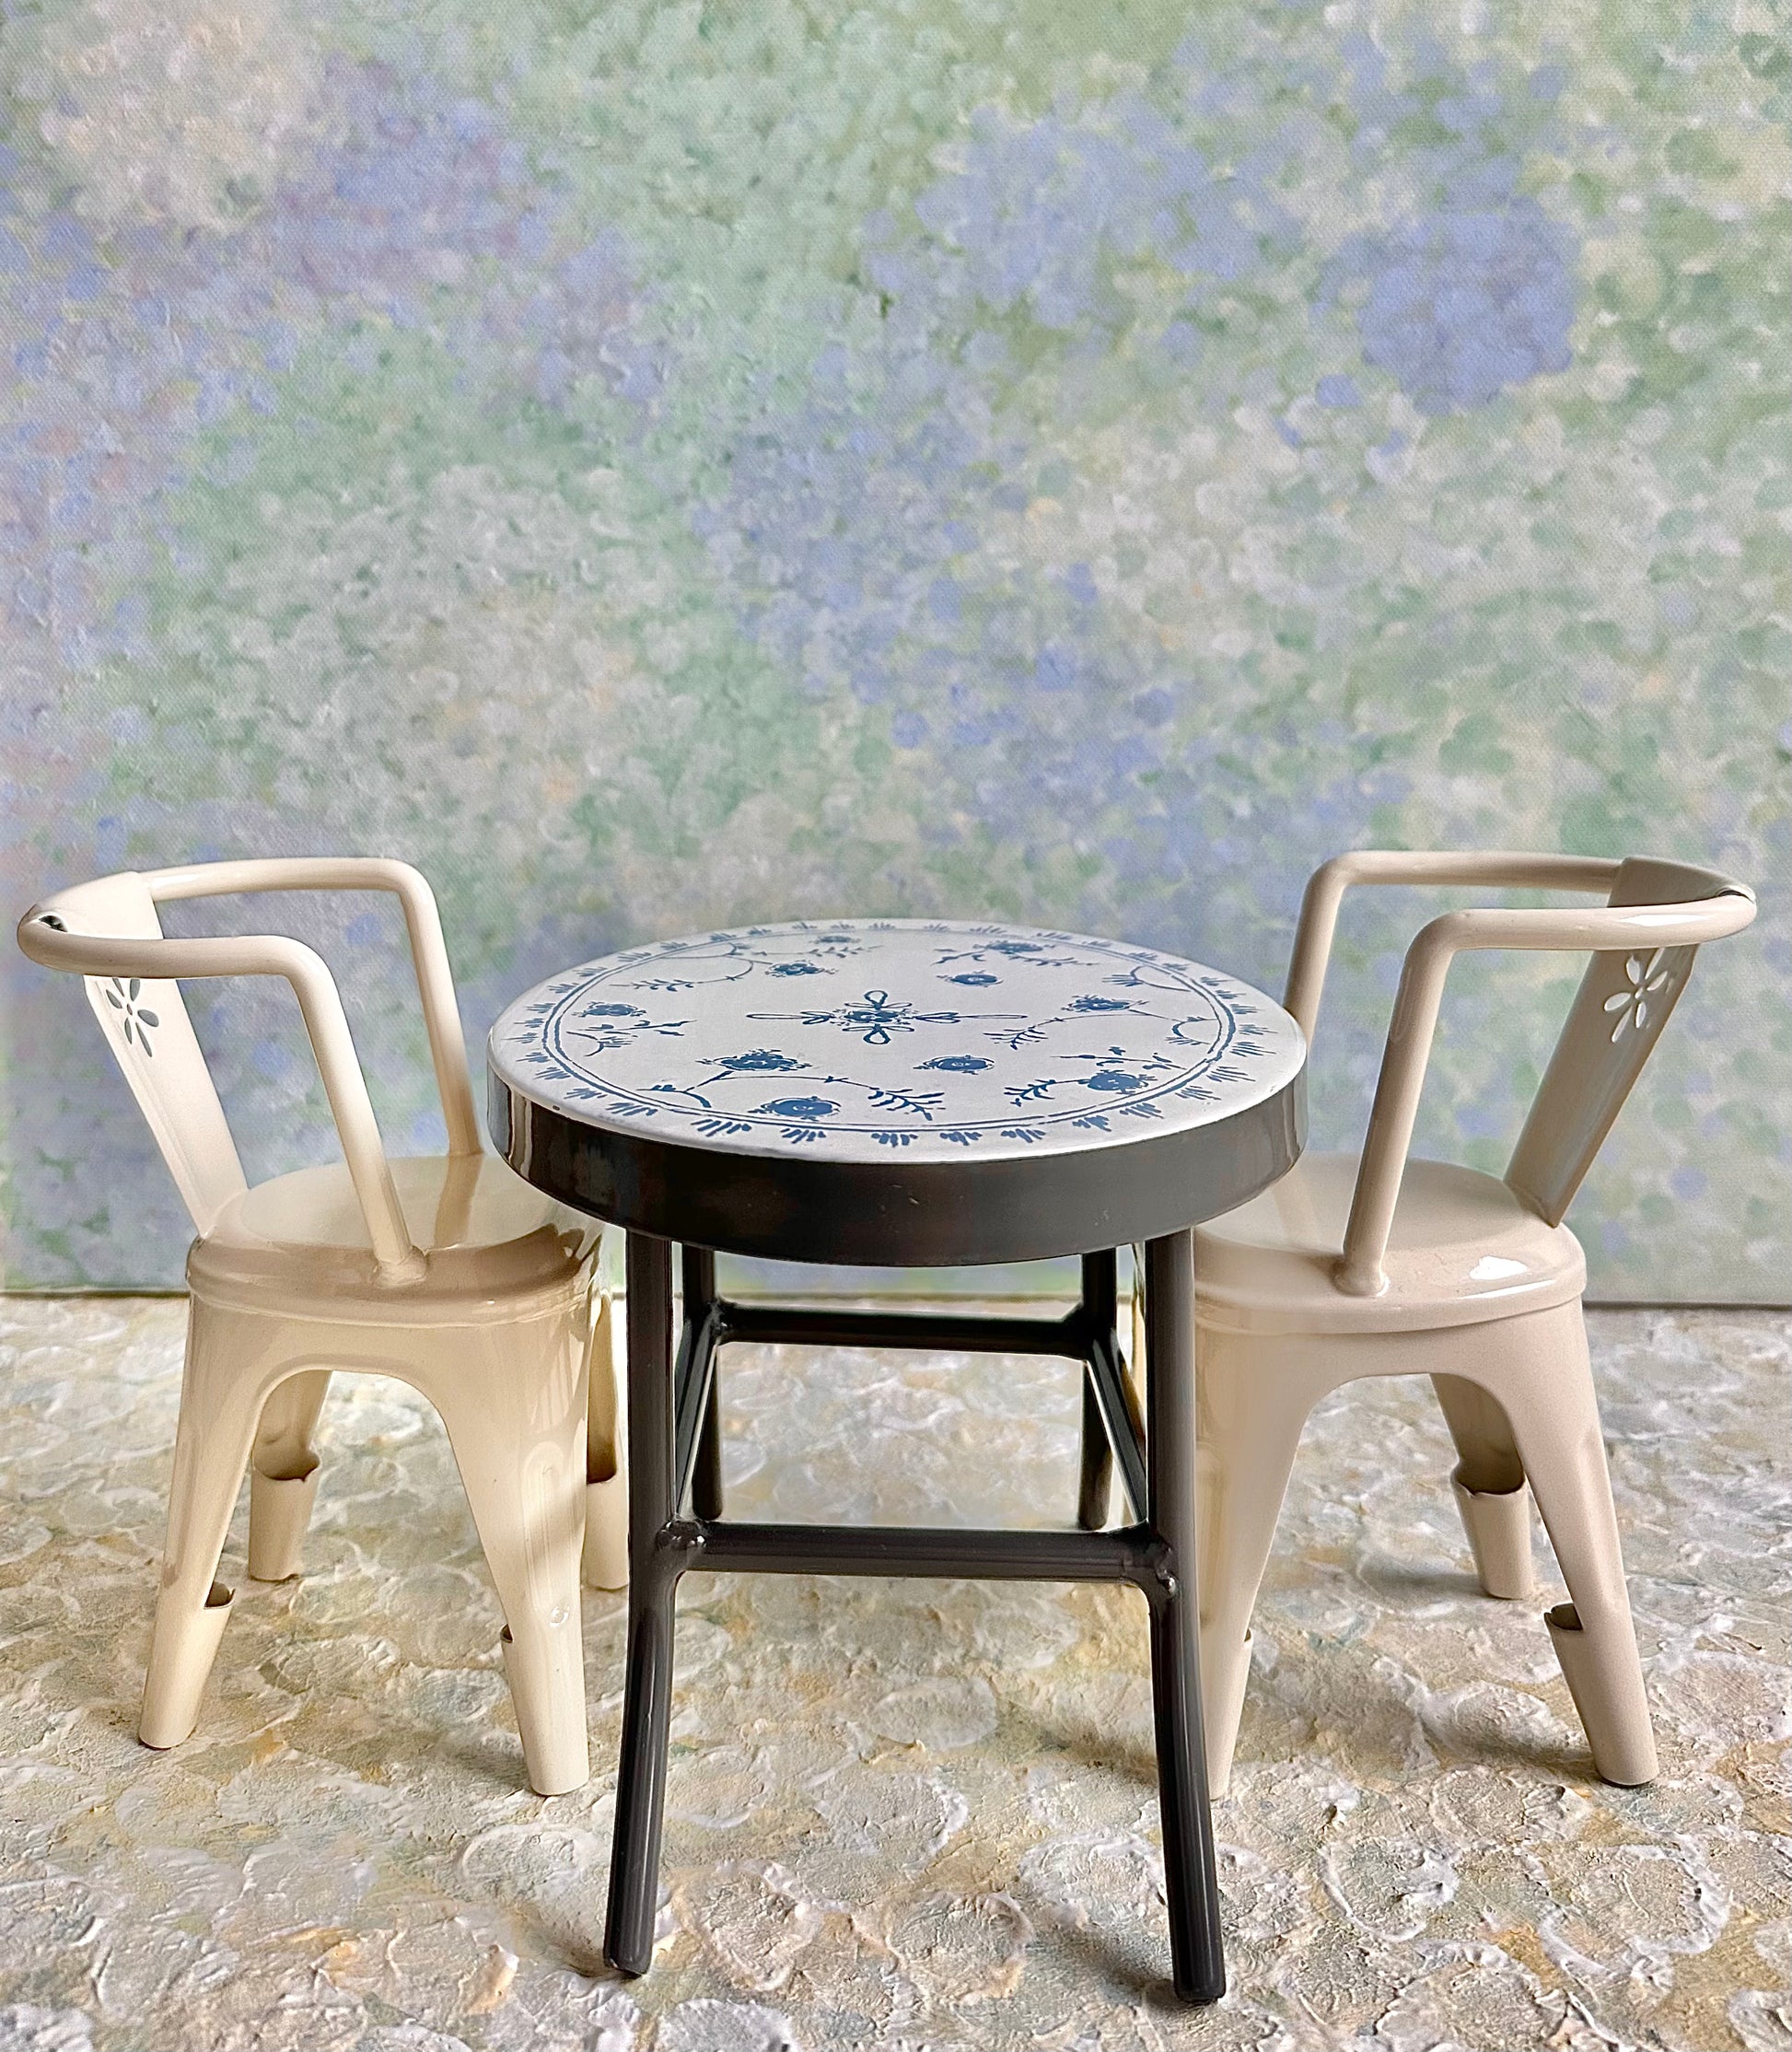 Café Table with Chairs - 2014